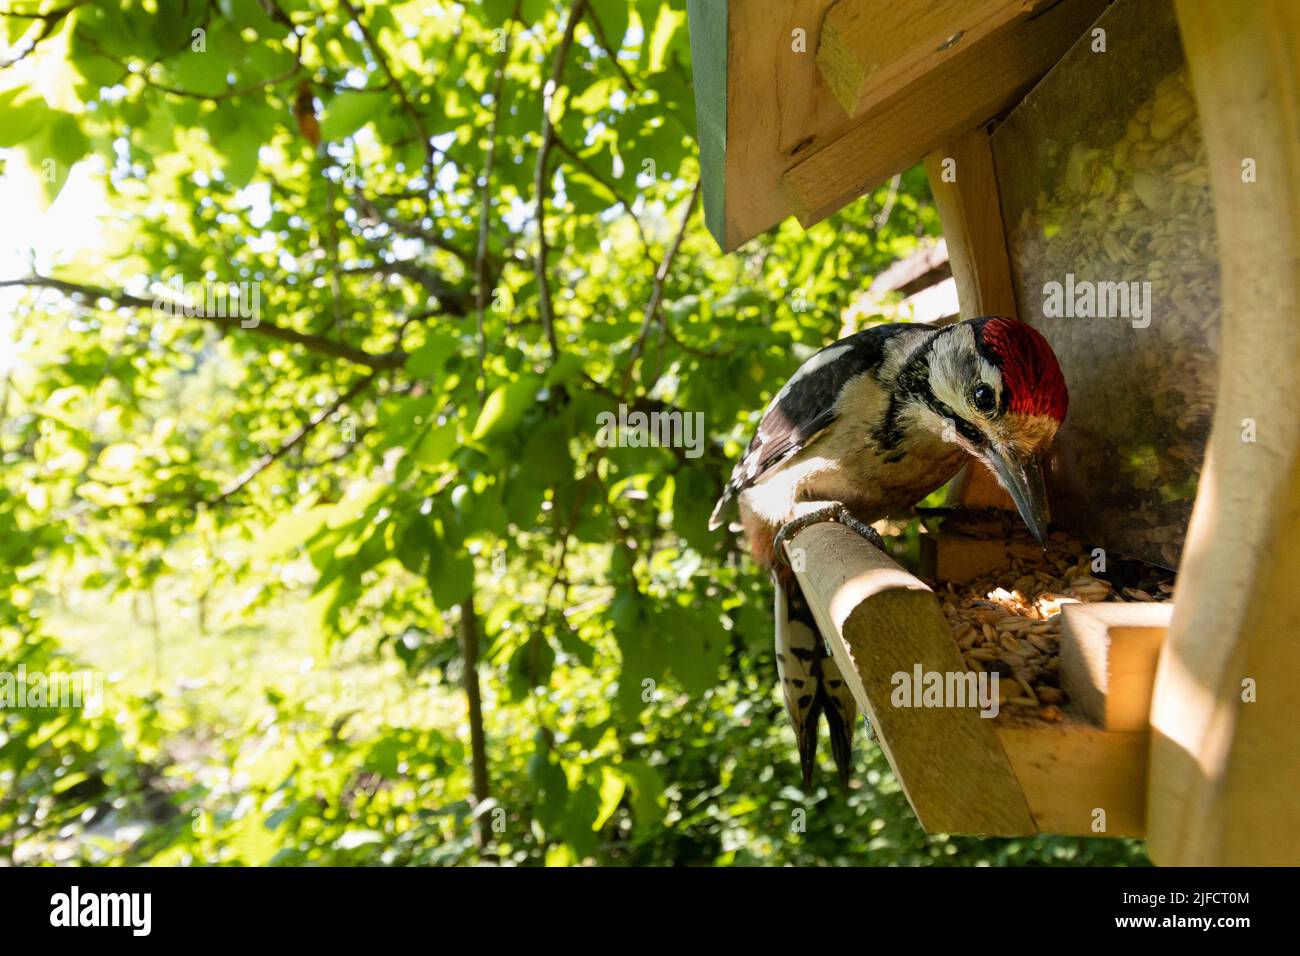 close-up of great spotted woodpecker on bird feeder station. Blurred natural background Stock Photo